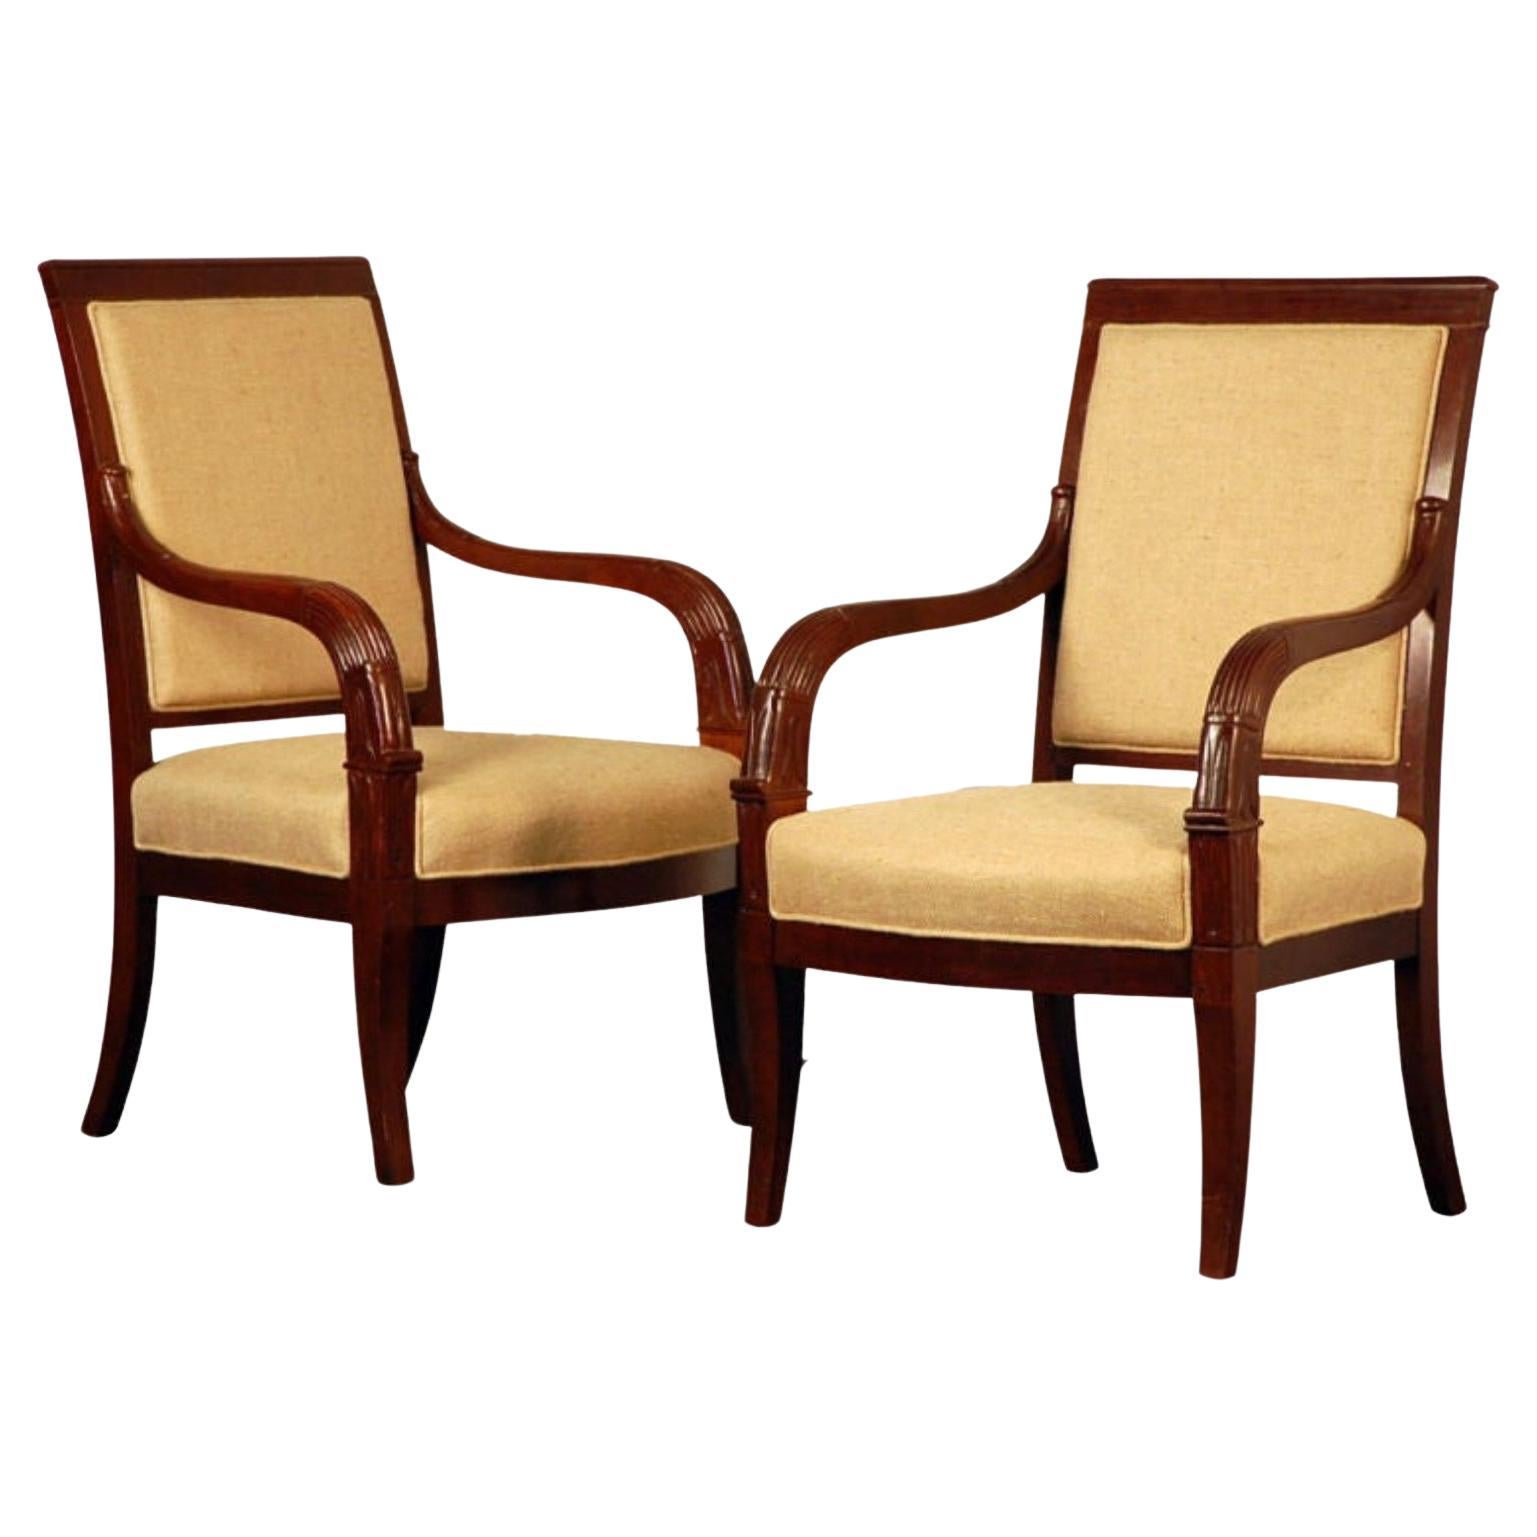 Pair of Chic French Empire Style Mahogany Armchairs For Sale